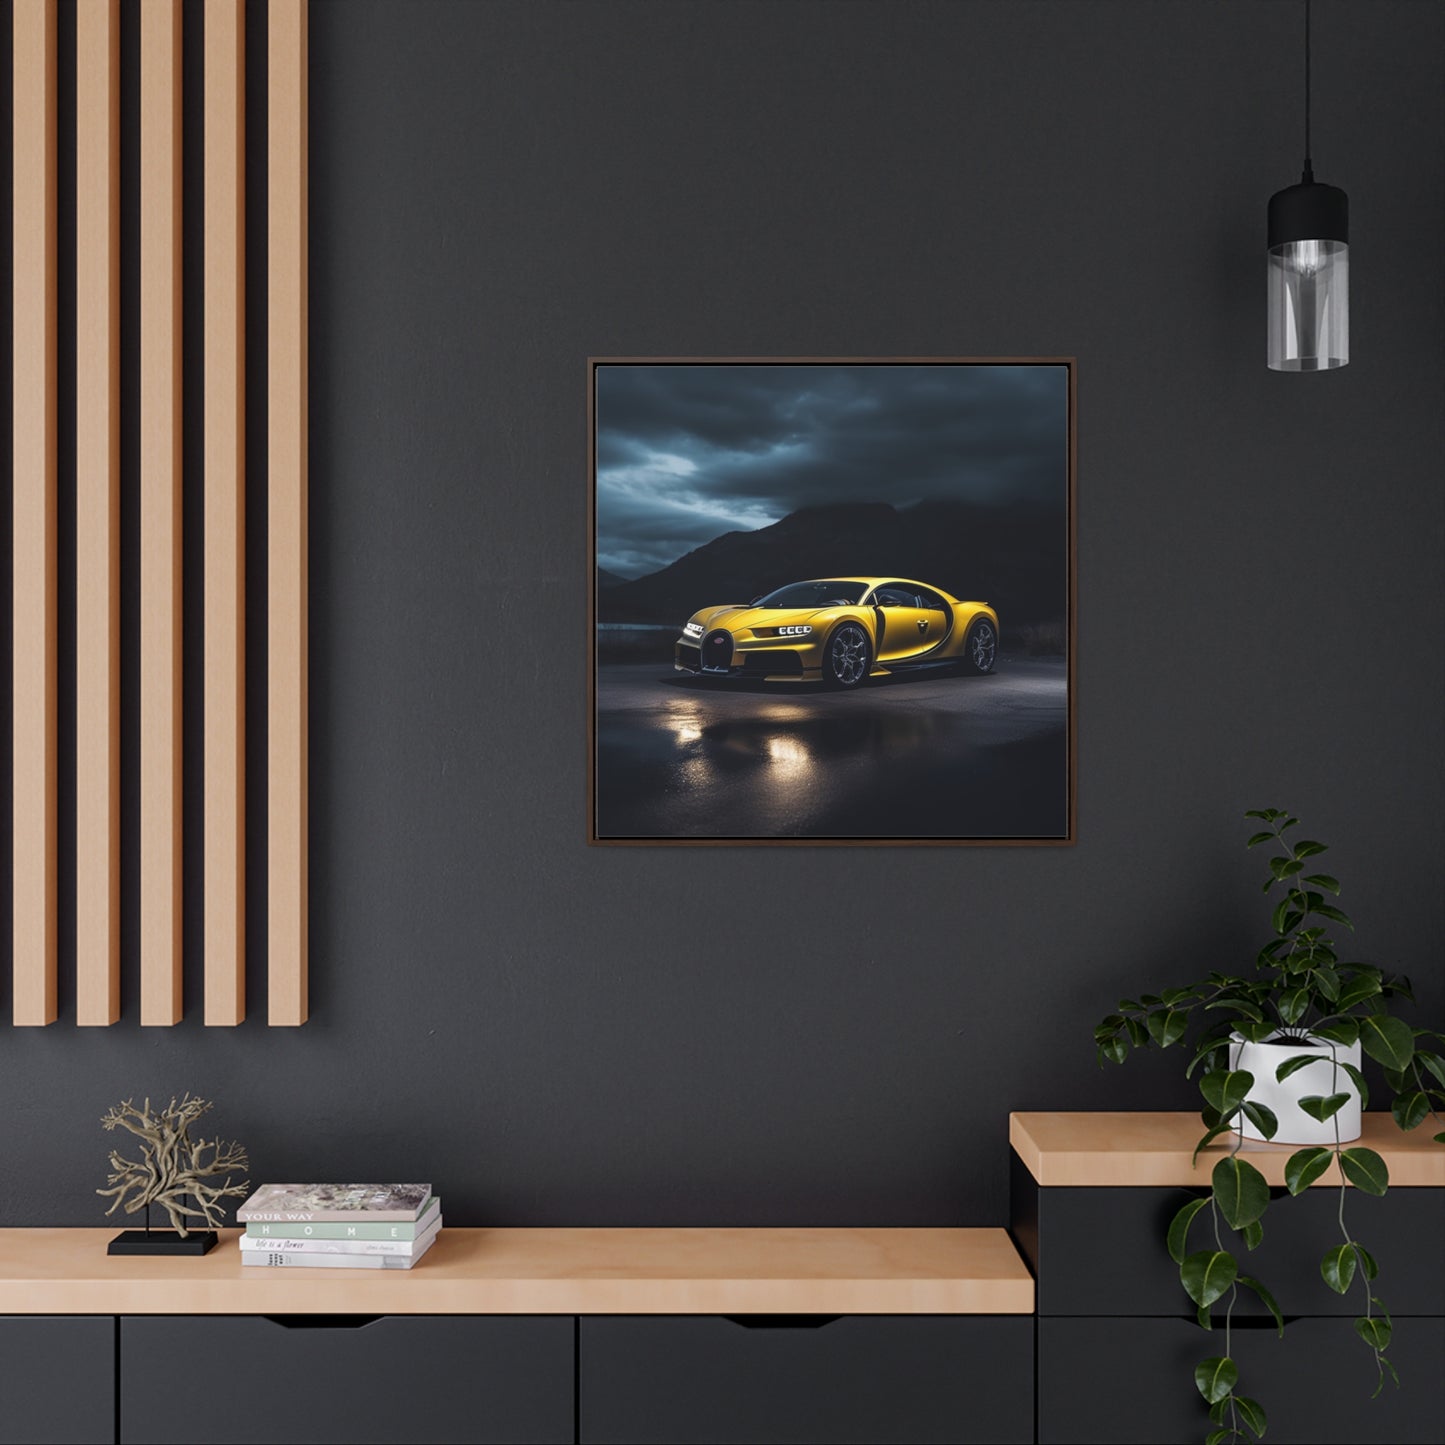 Gallery Canvas Wraps, Square Frame Bugatti Real Look 4